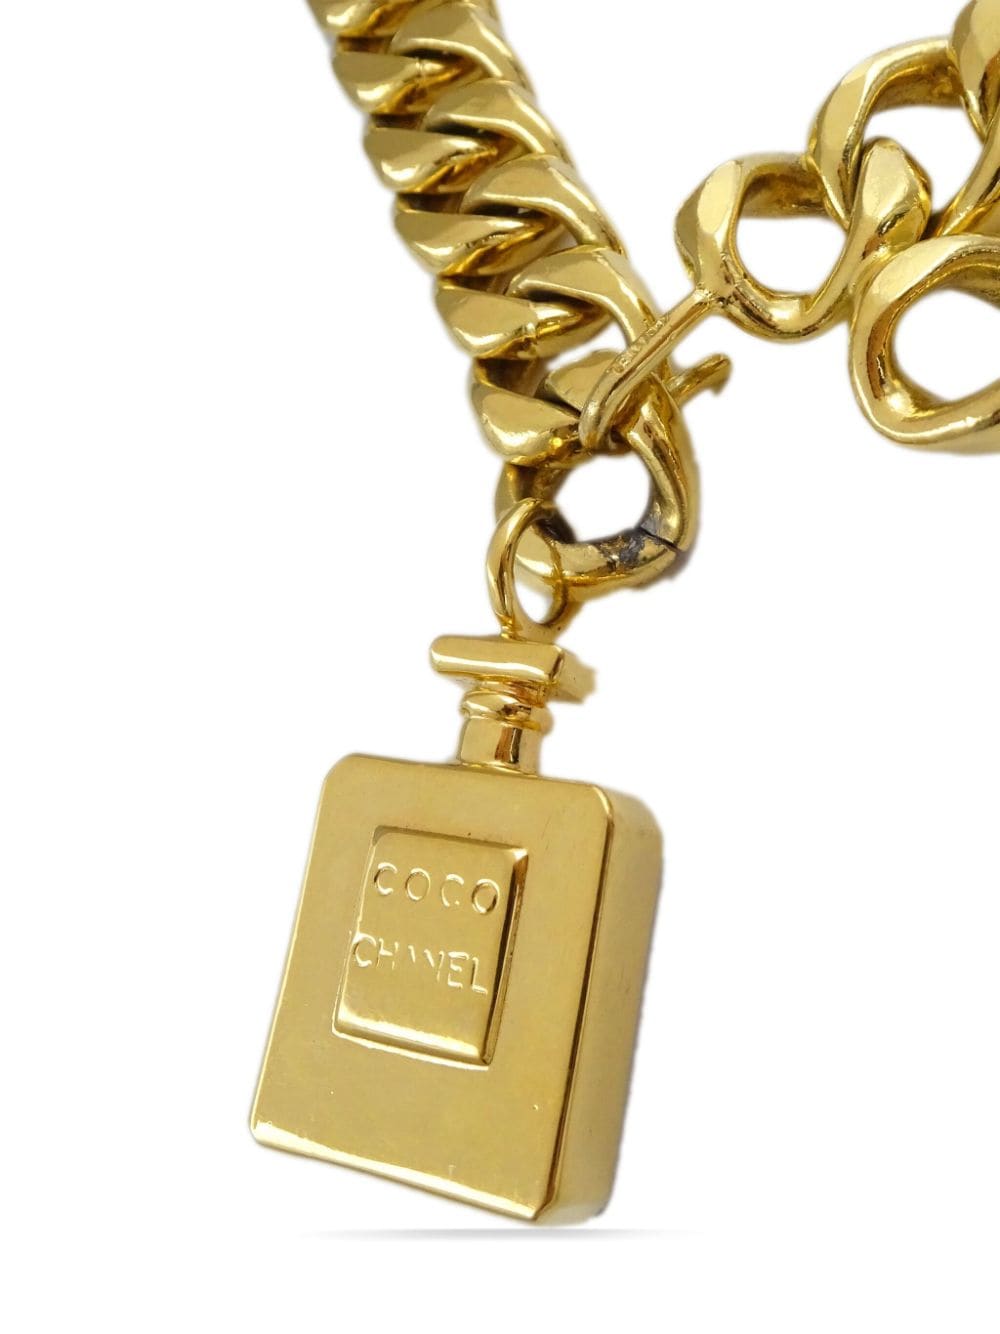 Vintage Chanel belt, double row gold-plated chain, Coco perfume bottle  charm, circa 1985-1990 ‣ For Sure Vintage